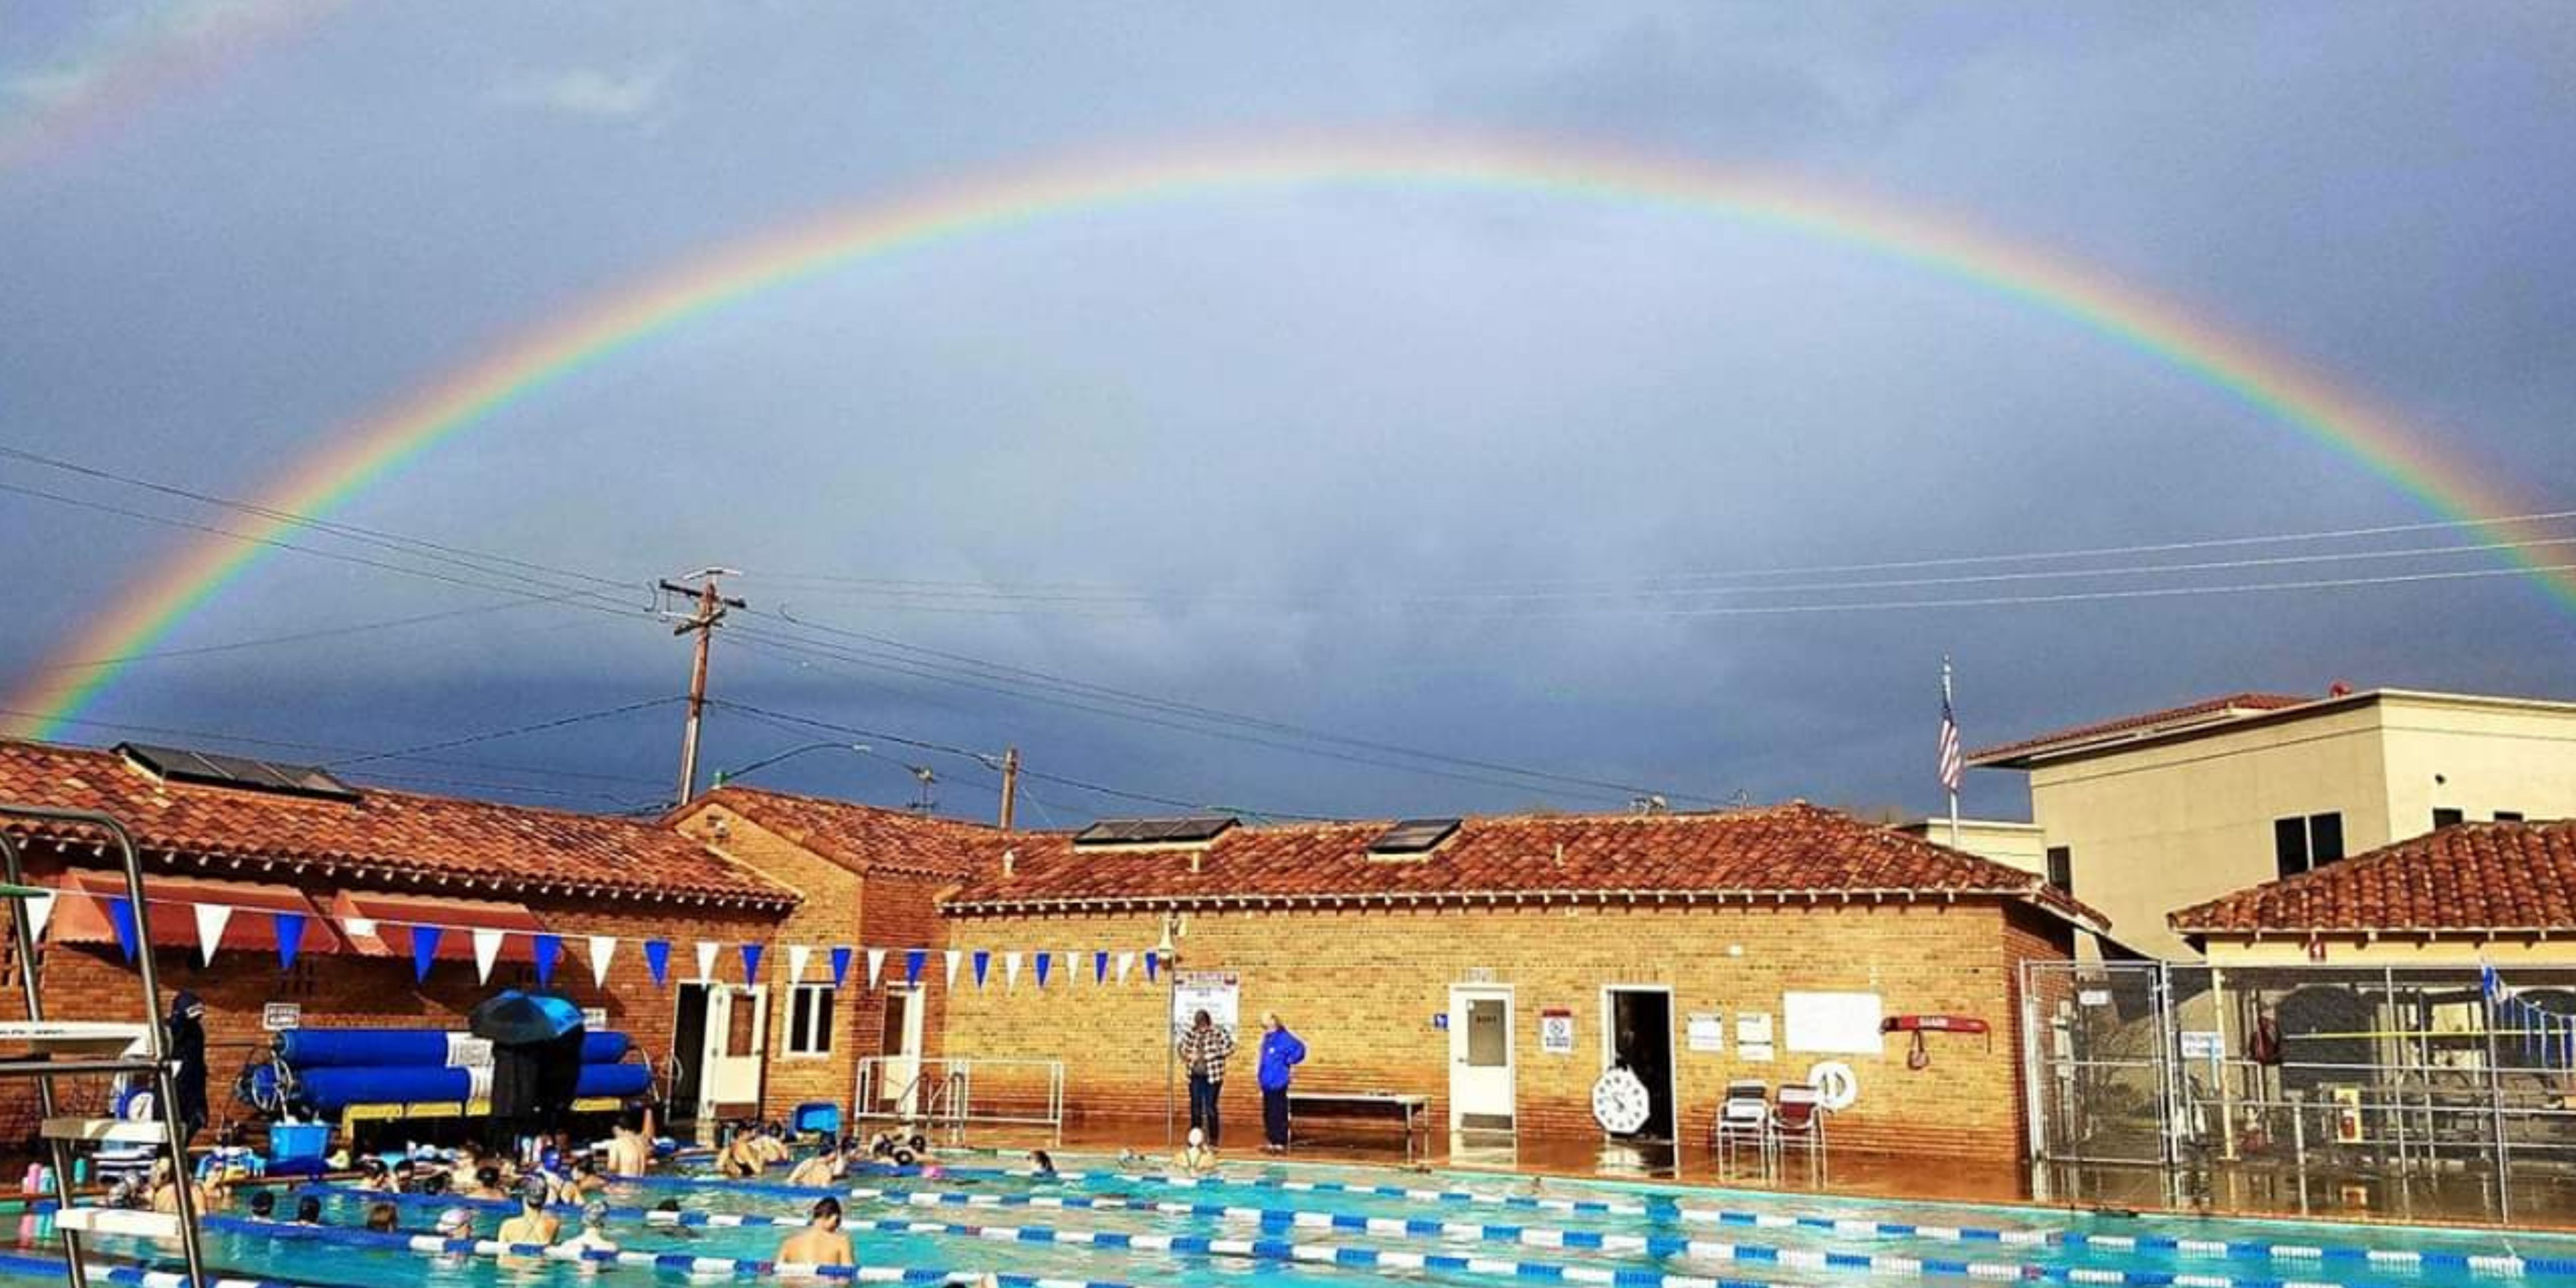 Pool with rainbow in sky